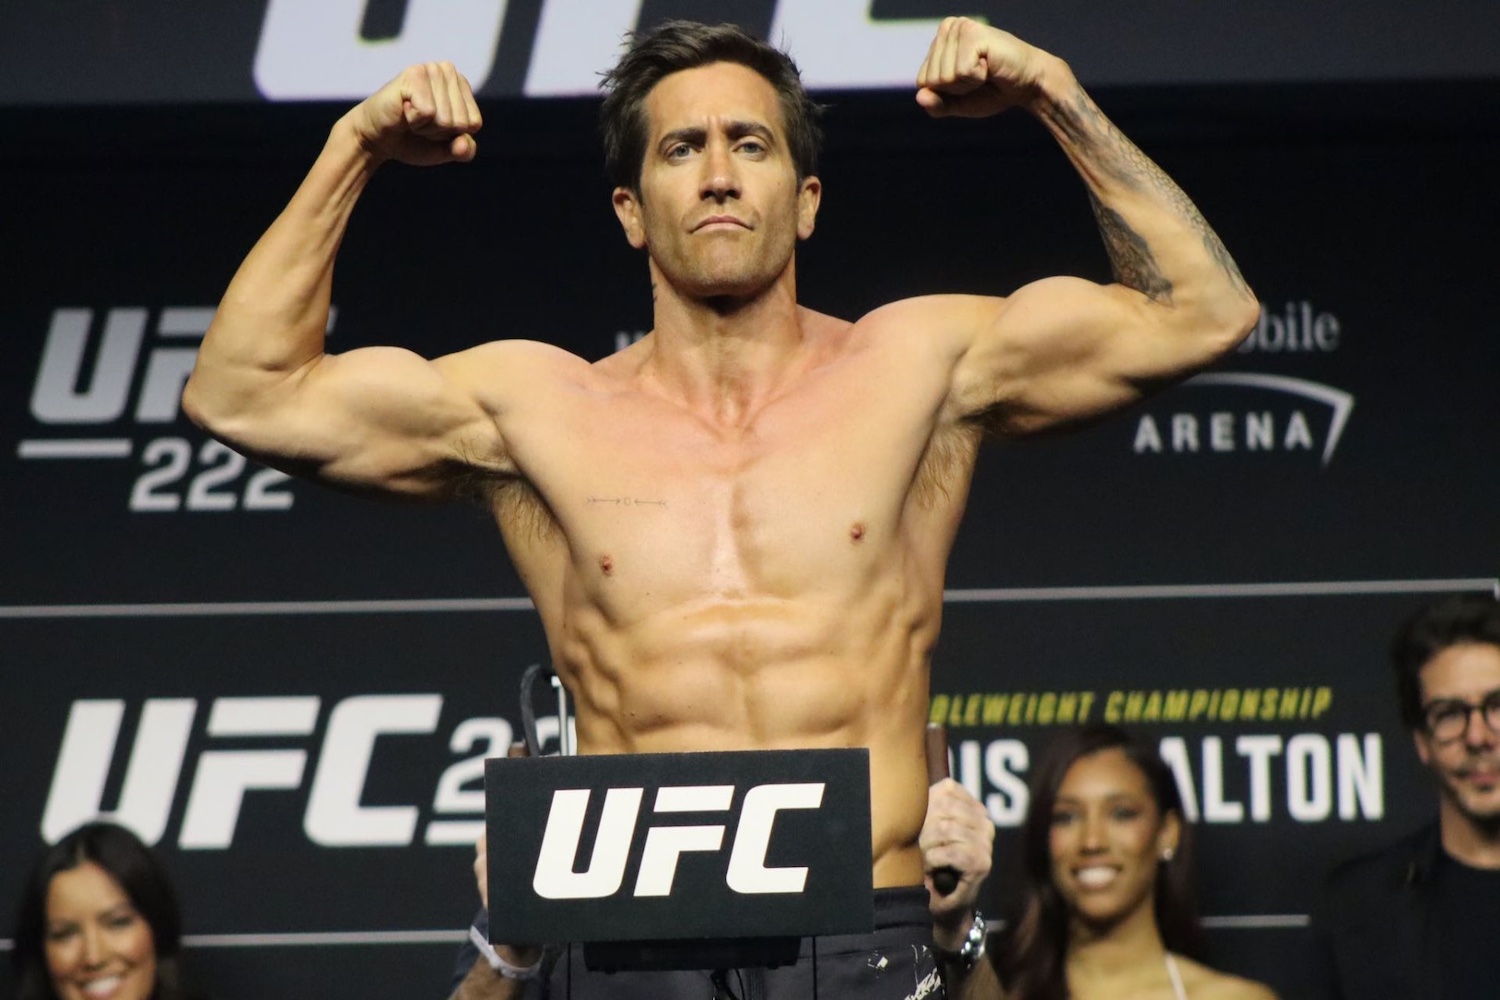 absorptie zuiverheid Stralend Jake Gyllenhaal Shocks World With UFC Knockout And Jacked Physique - DMARGE